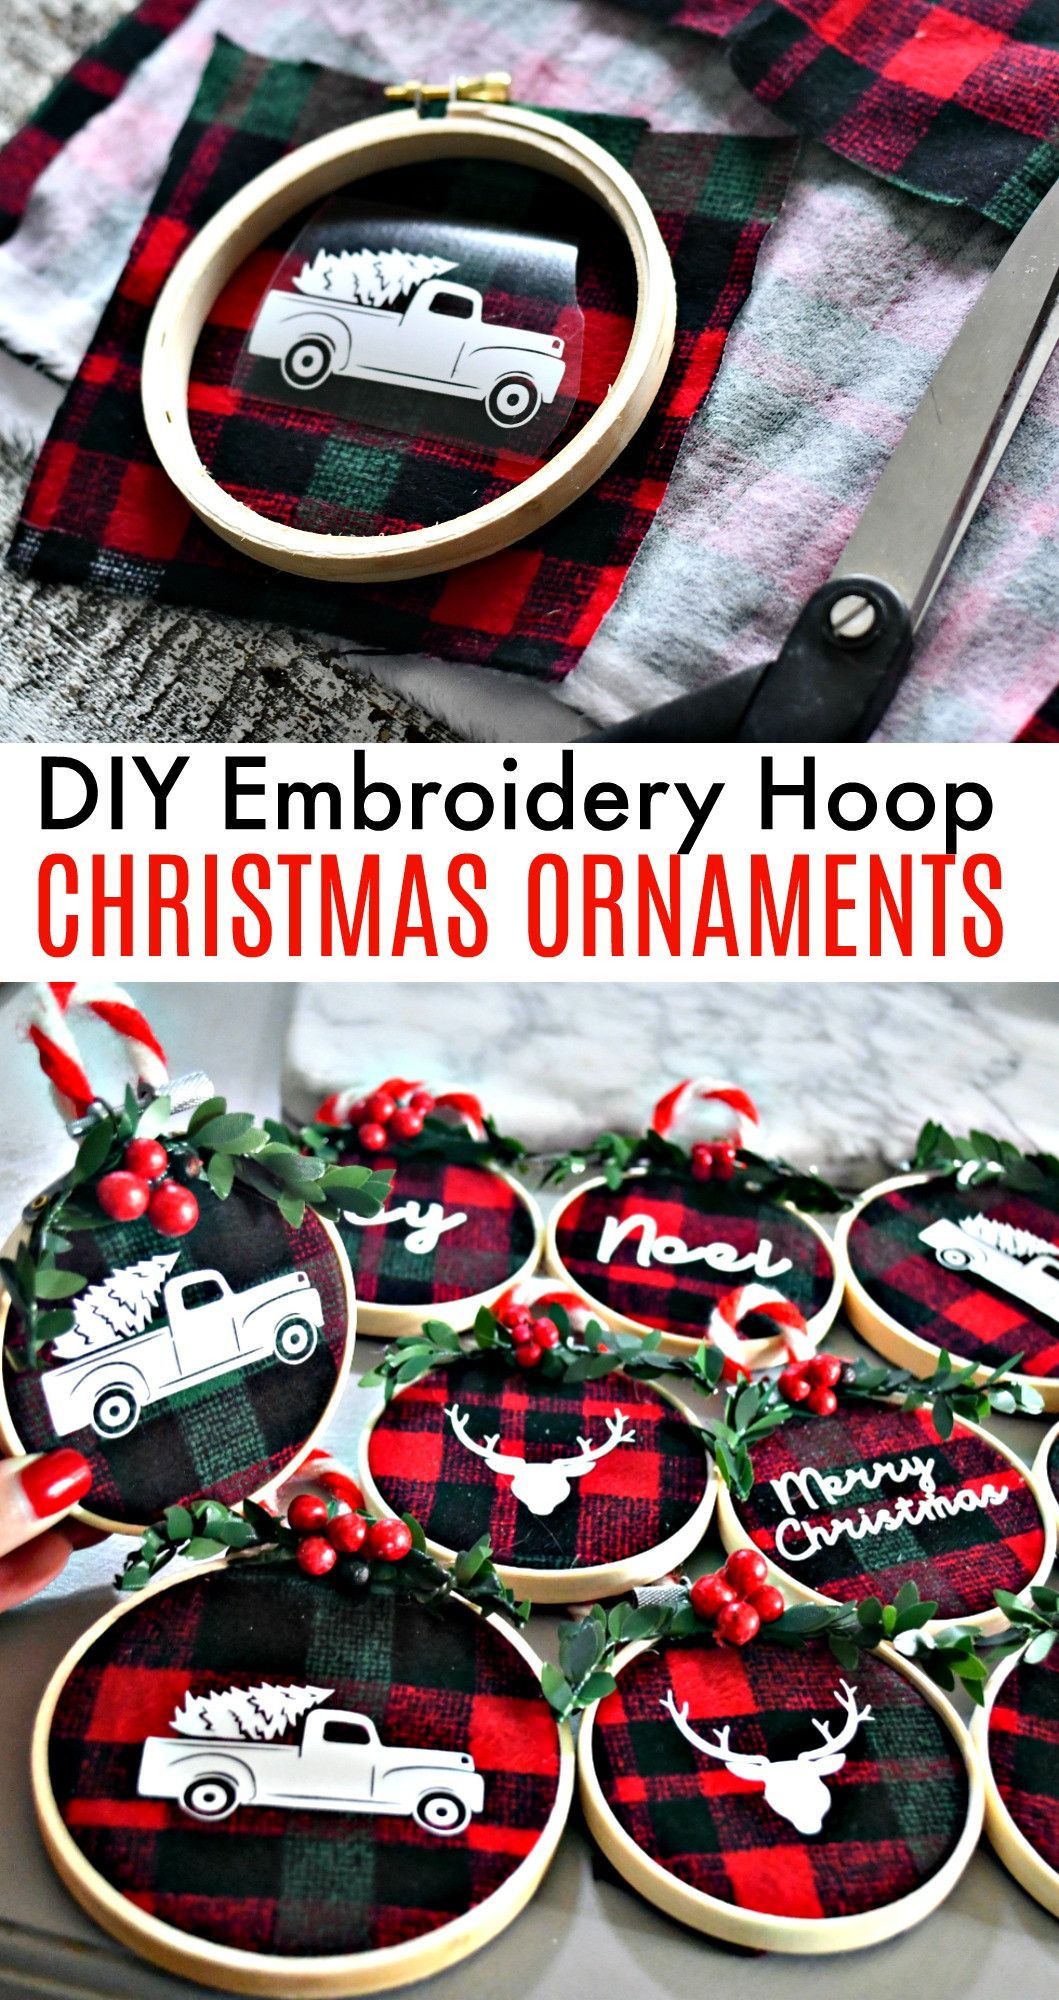 DIY Embroidery Hoop Christmas Ornaments -   23 christmas crafts presents
 ideas